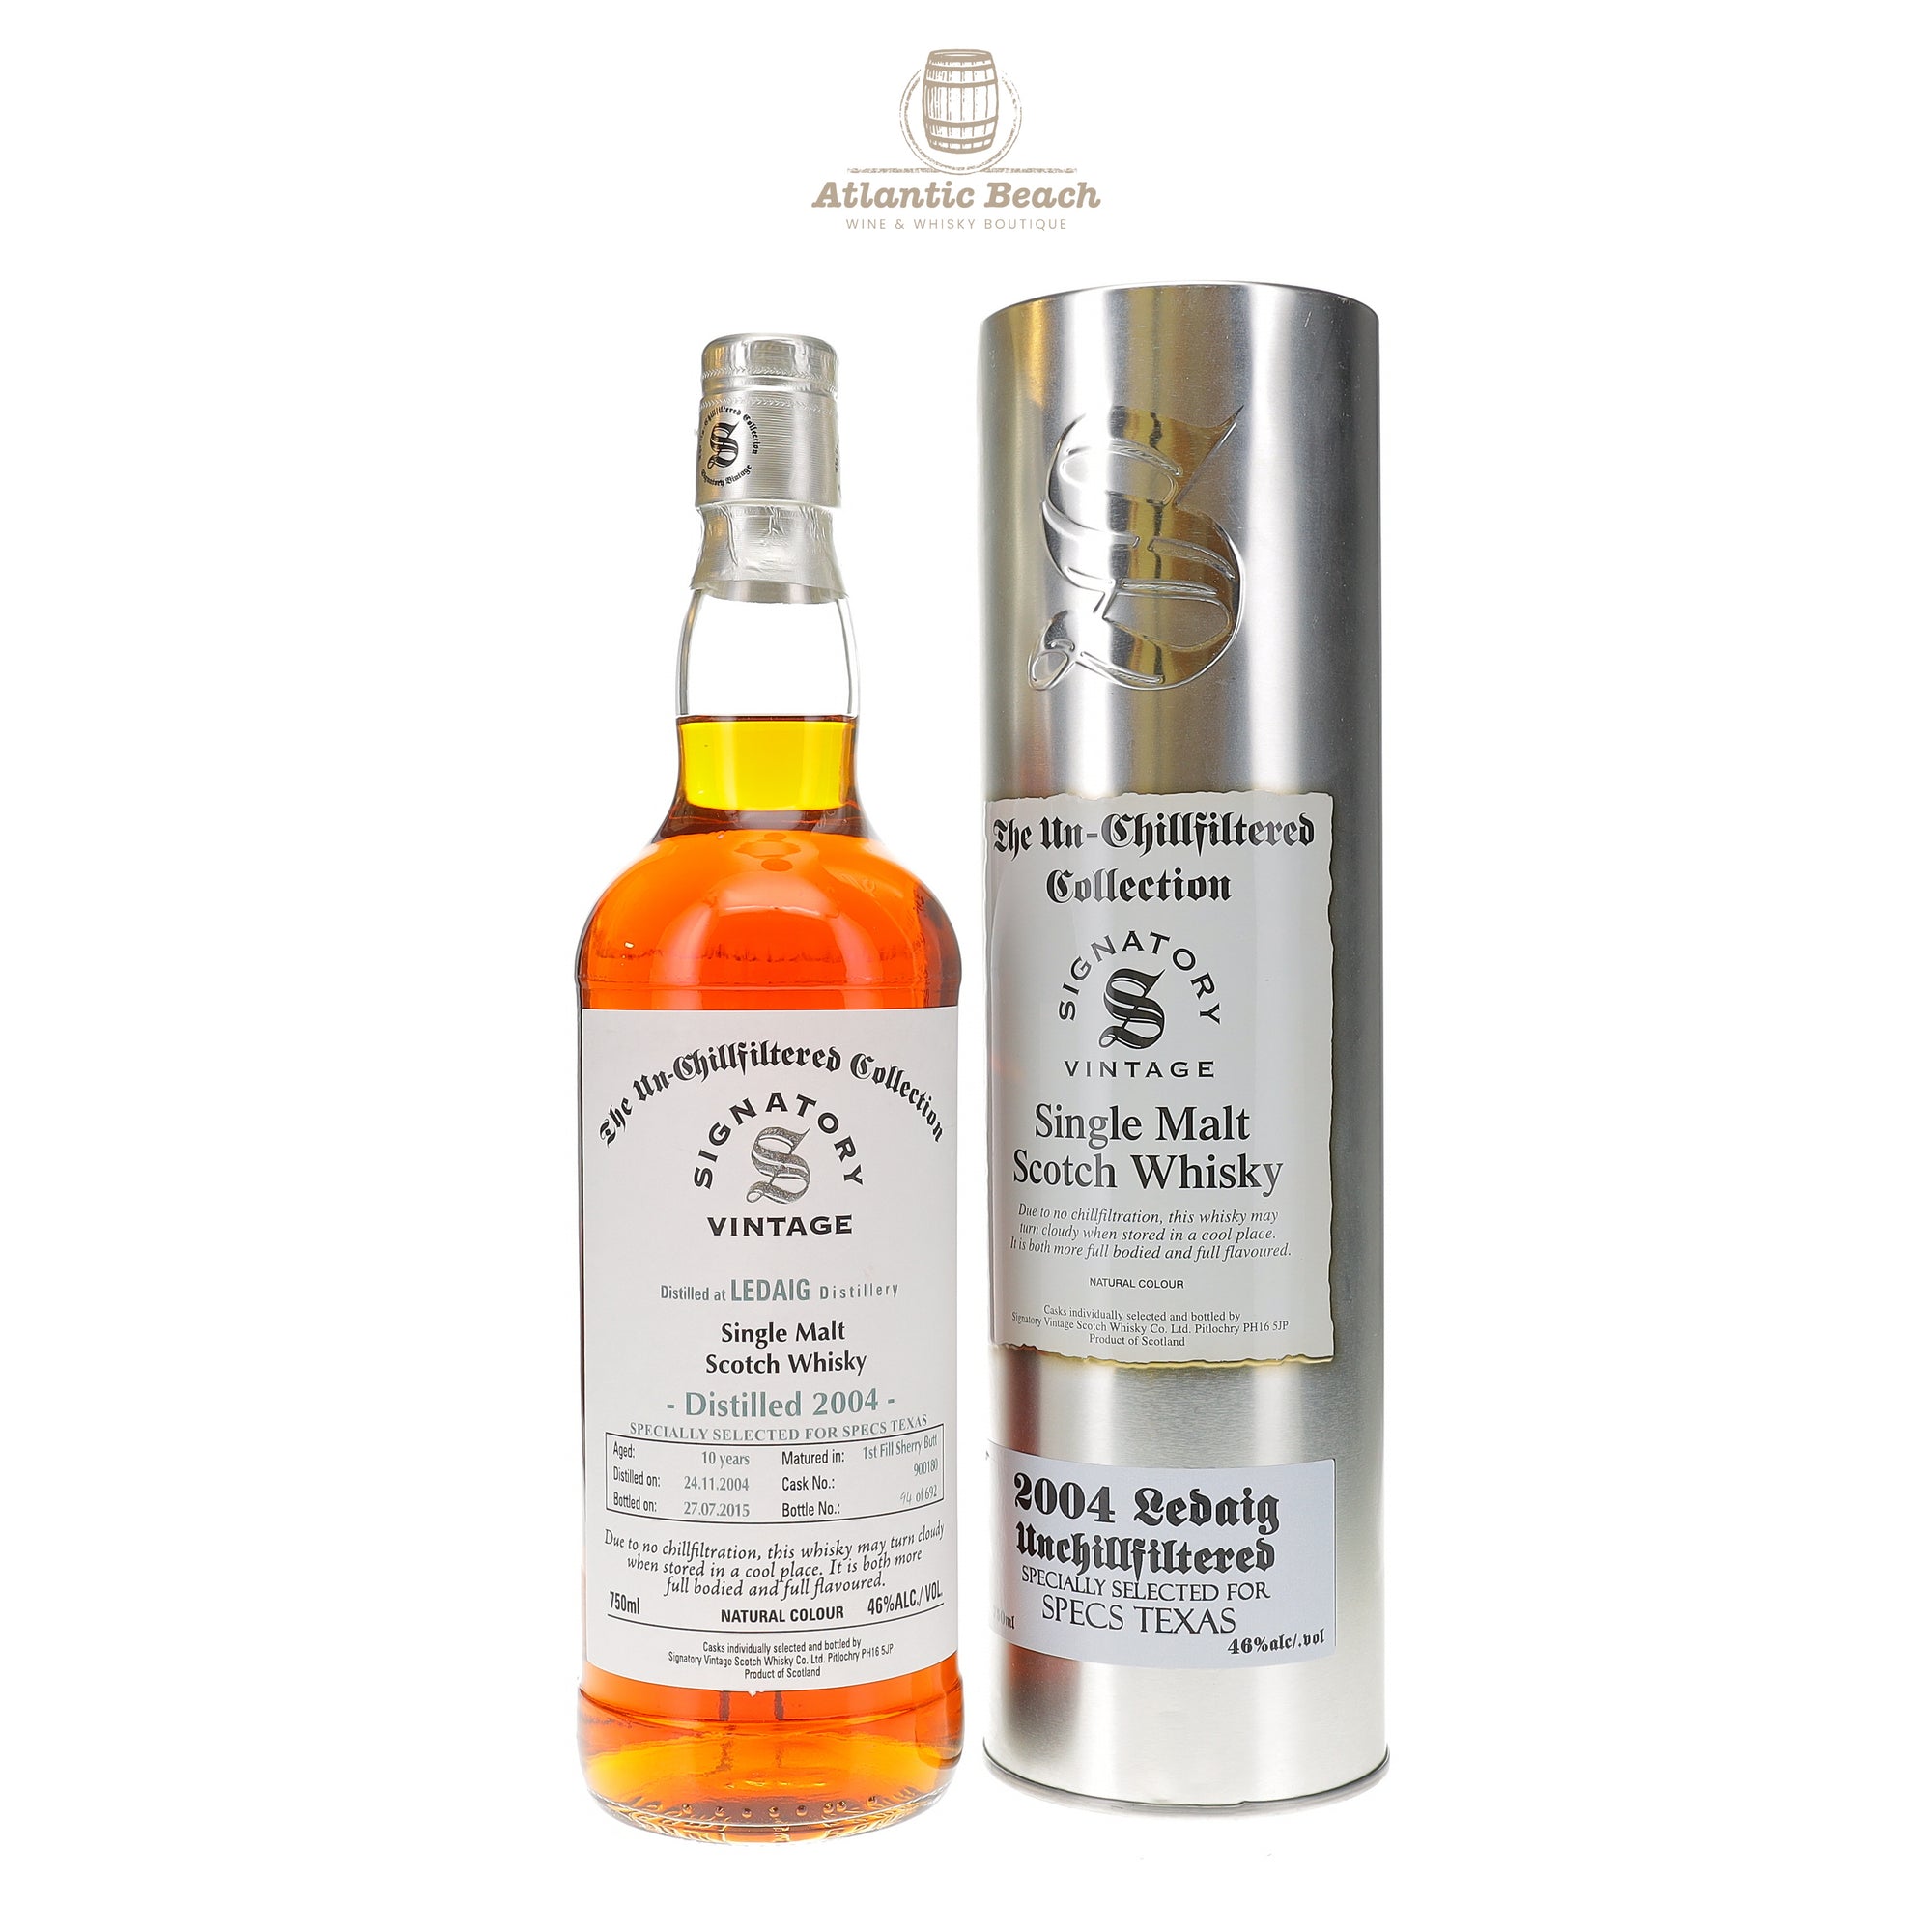 Signatory Ledaig 11 year Sherry (selected for Specs Texas)